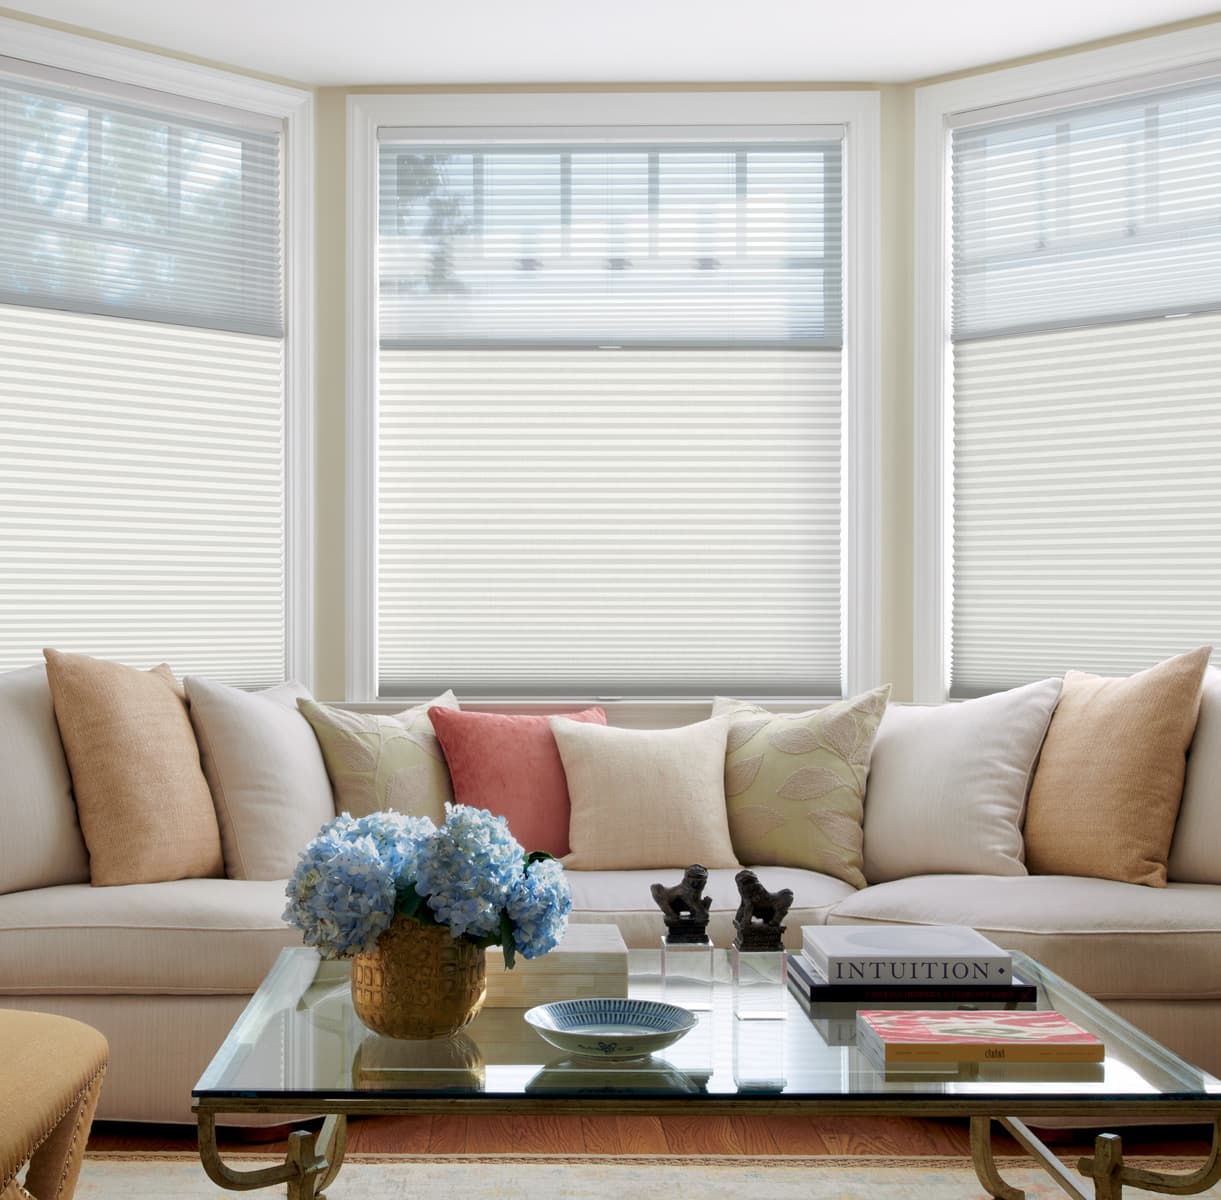 Duette® Honeycomb Shades on bay windows